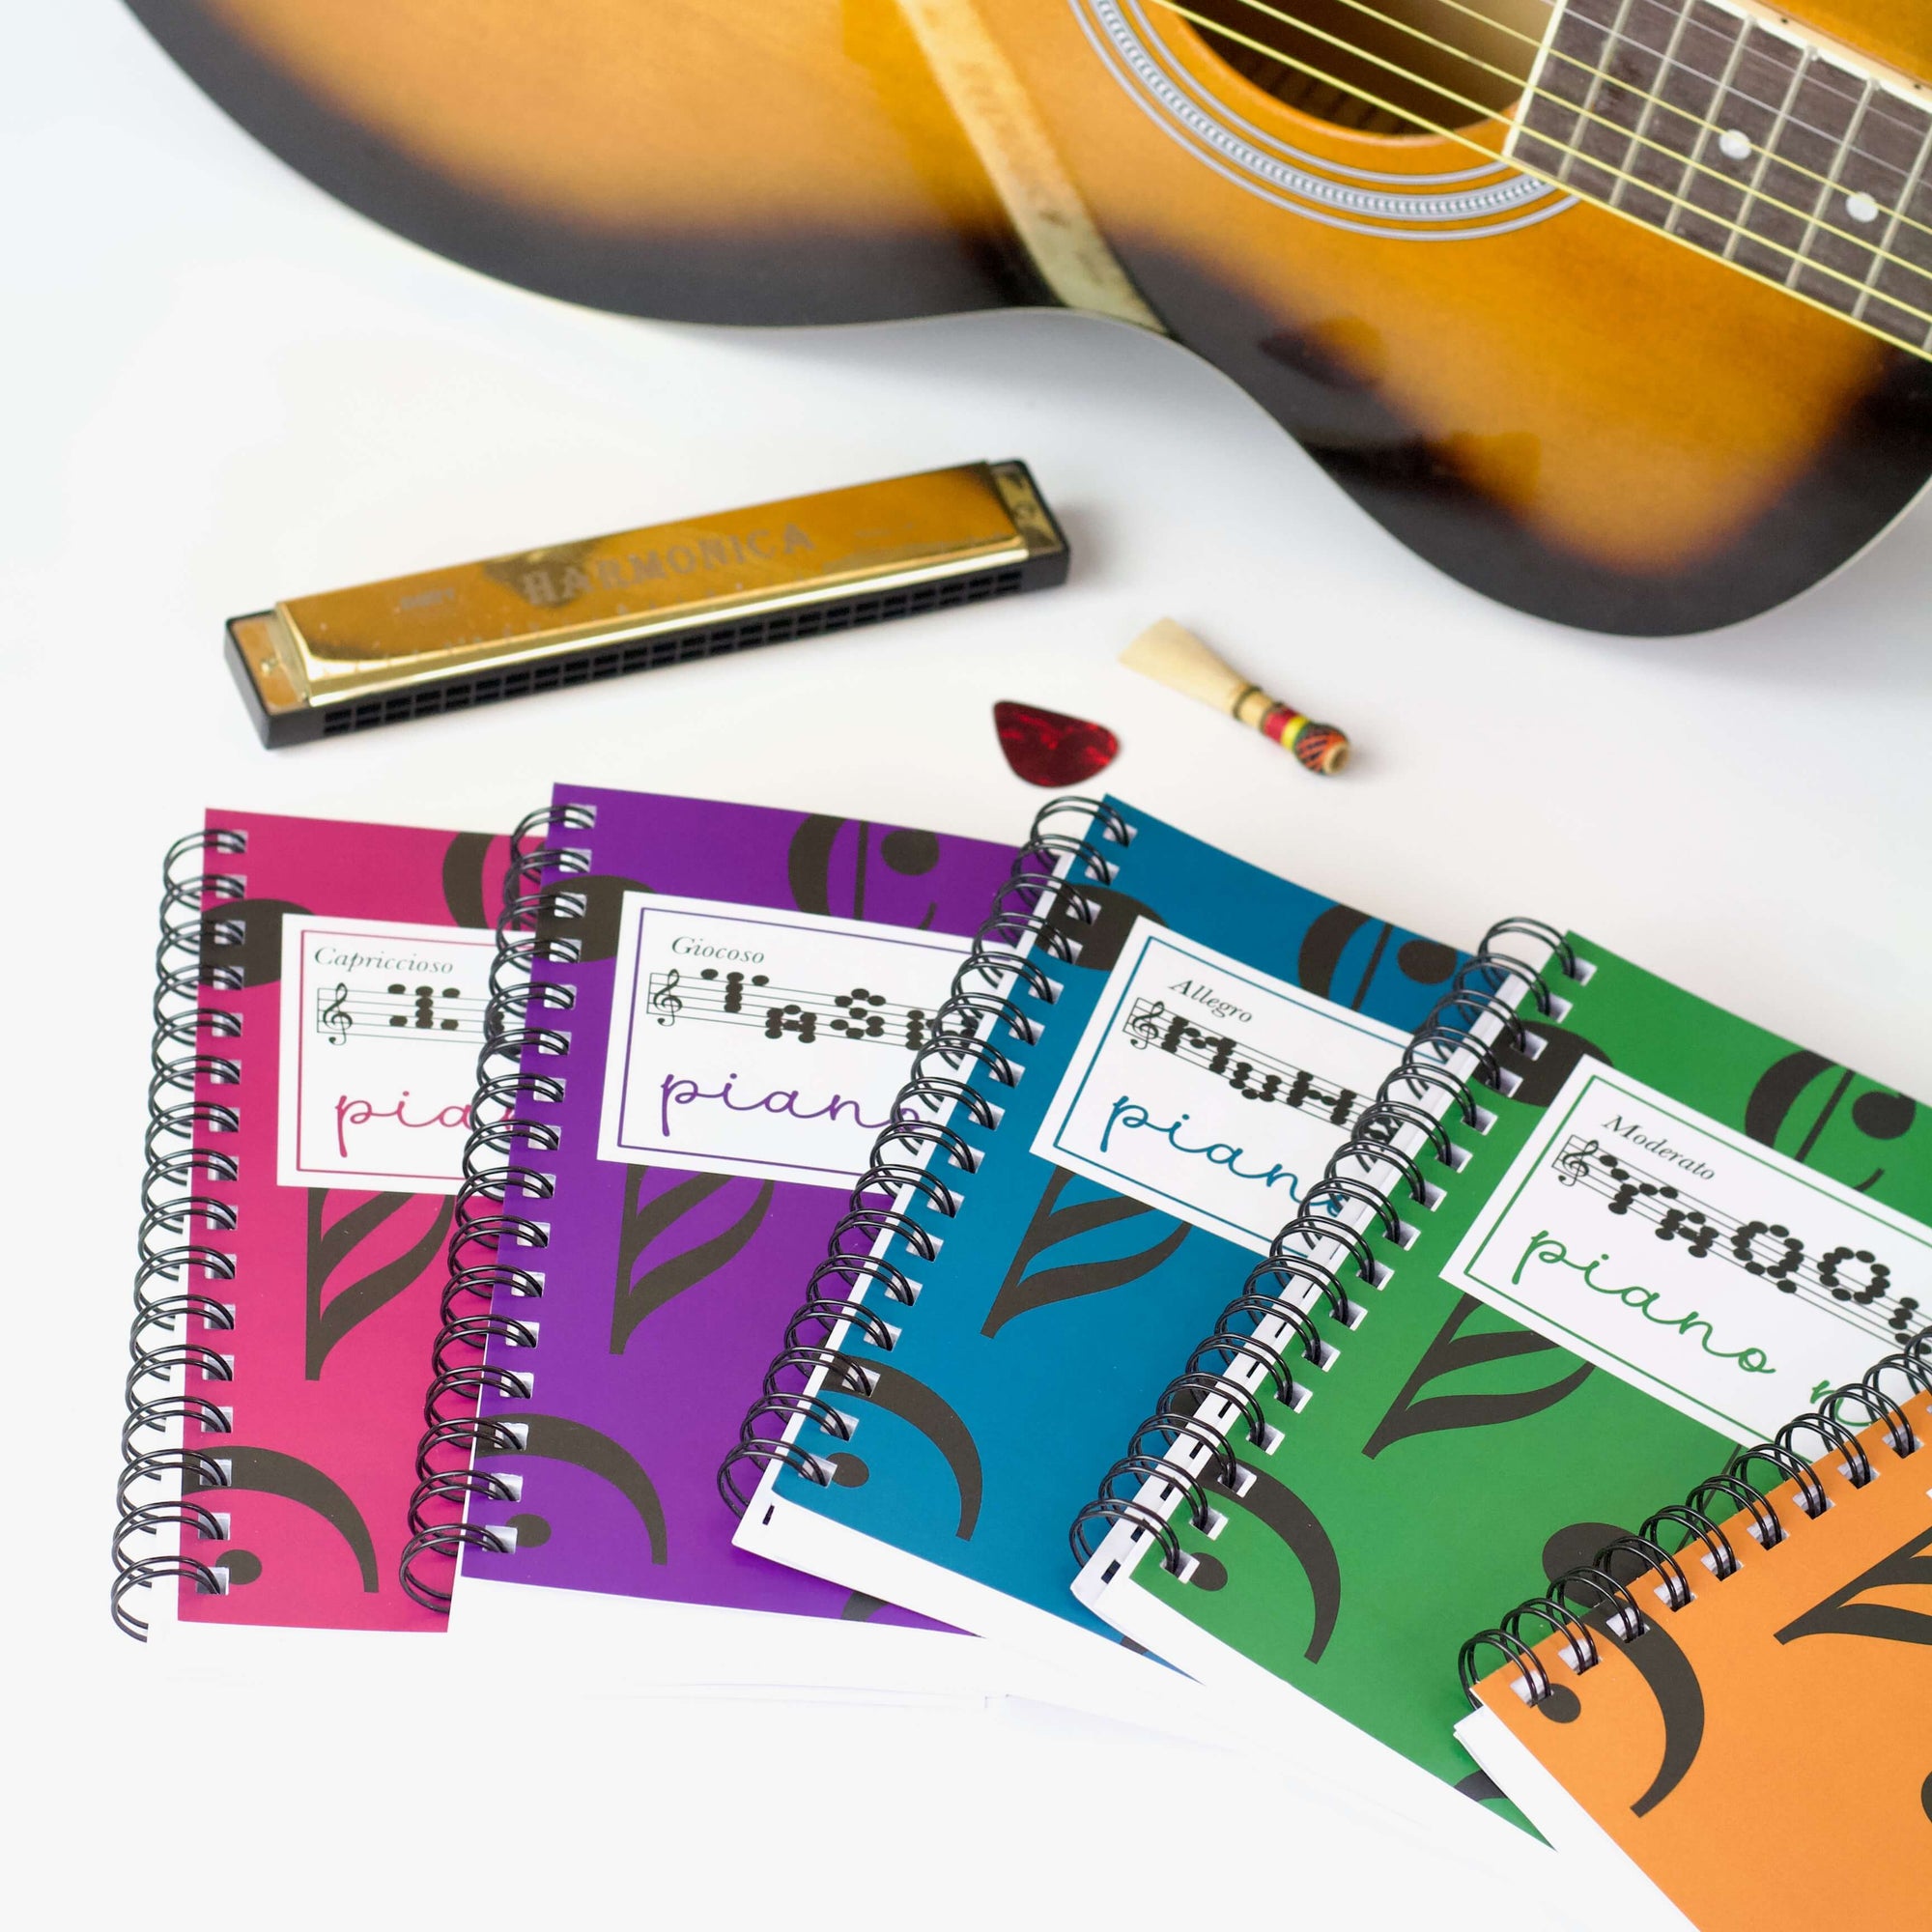 Our carefully-designed music notebooks combine the joy of music with the discipline of regular practice. They are the cornerstone of the Haluna Happy Names 'Musically' range, supporting the love and learning of music, with bags, tags, mugs and tees. Yay!